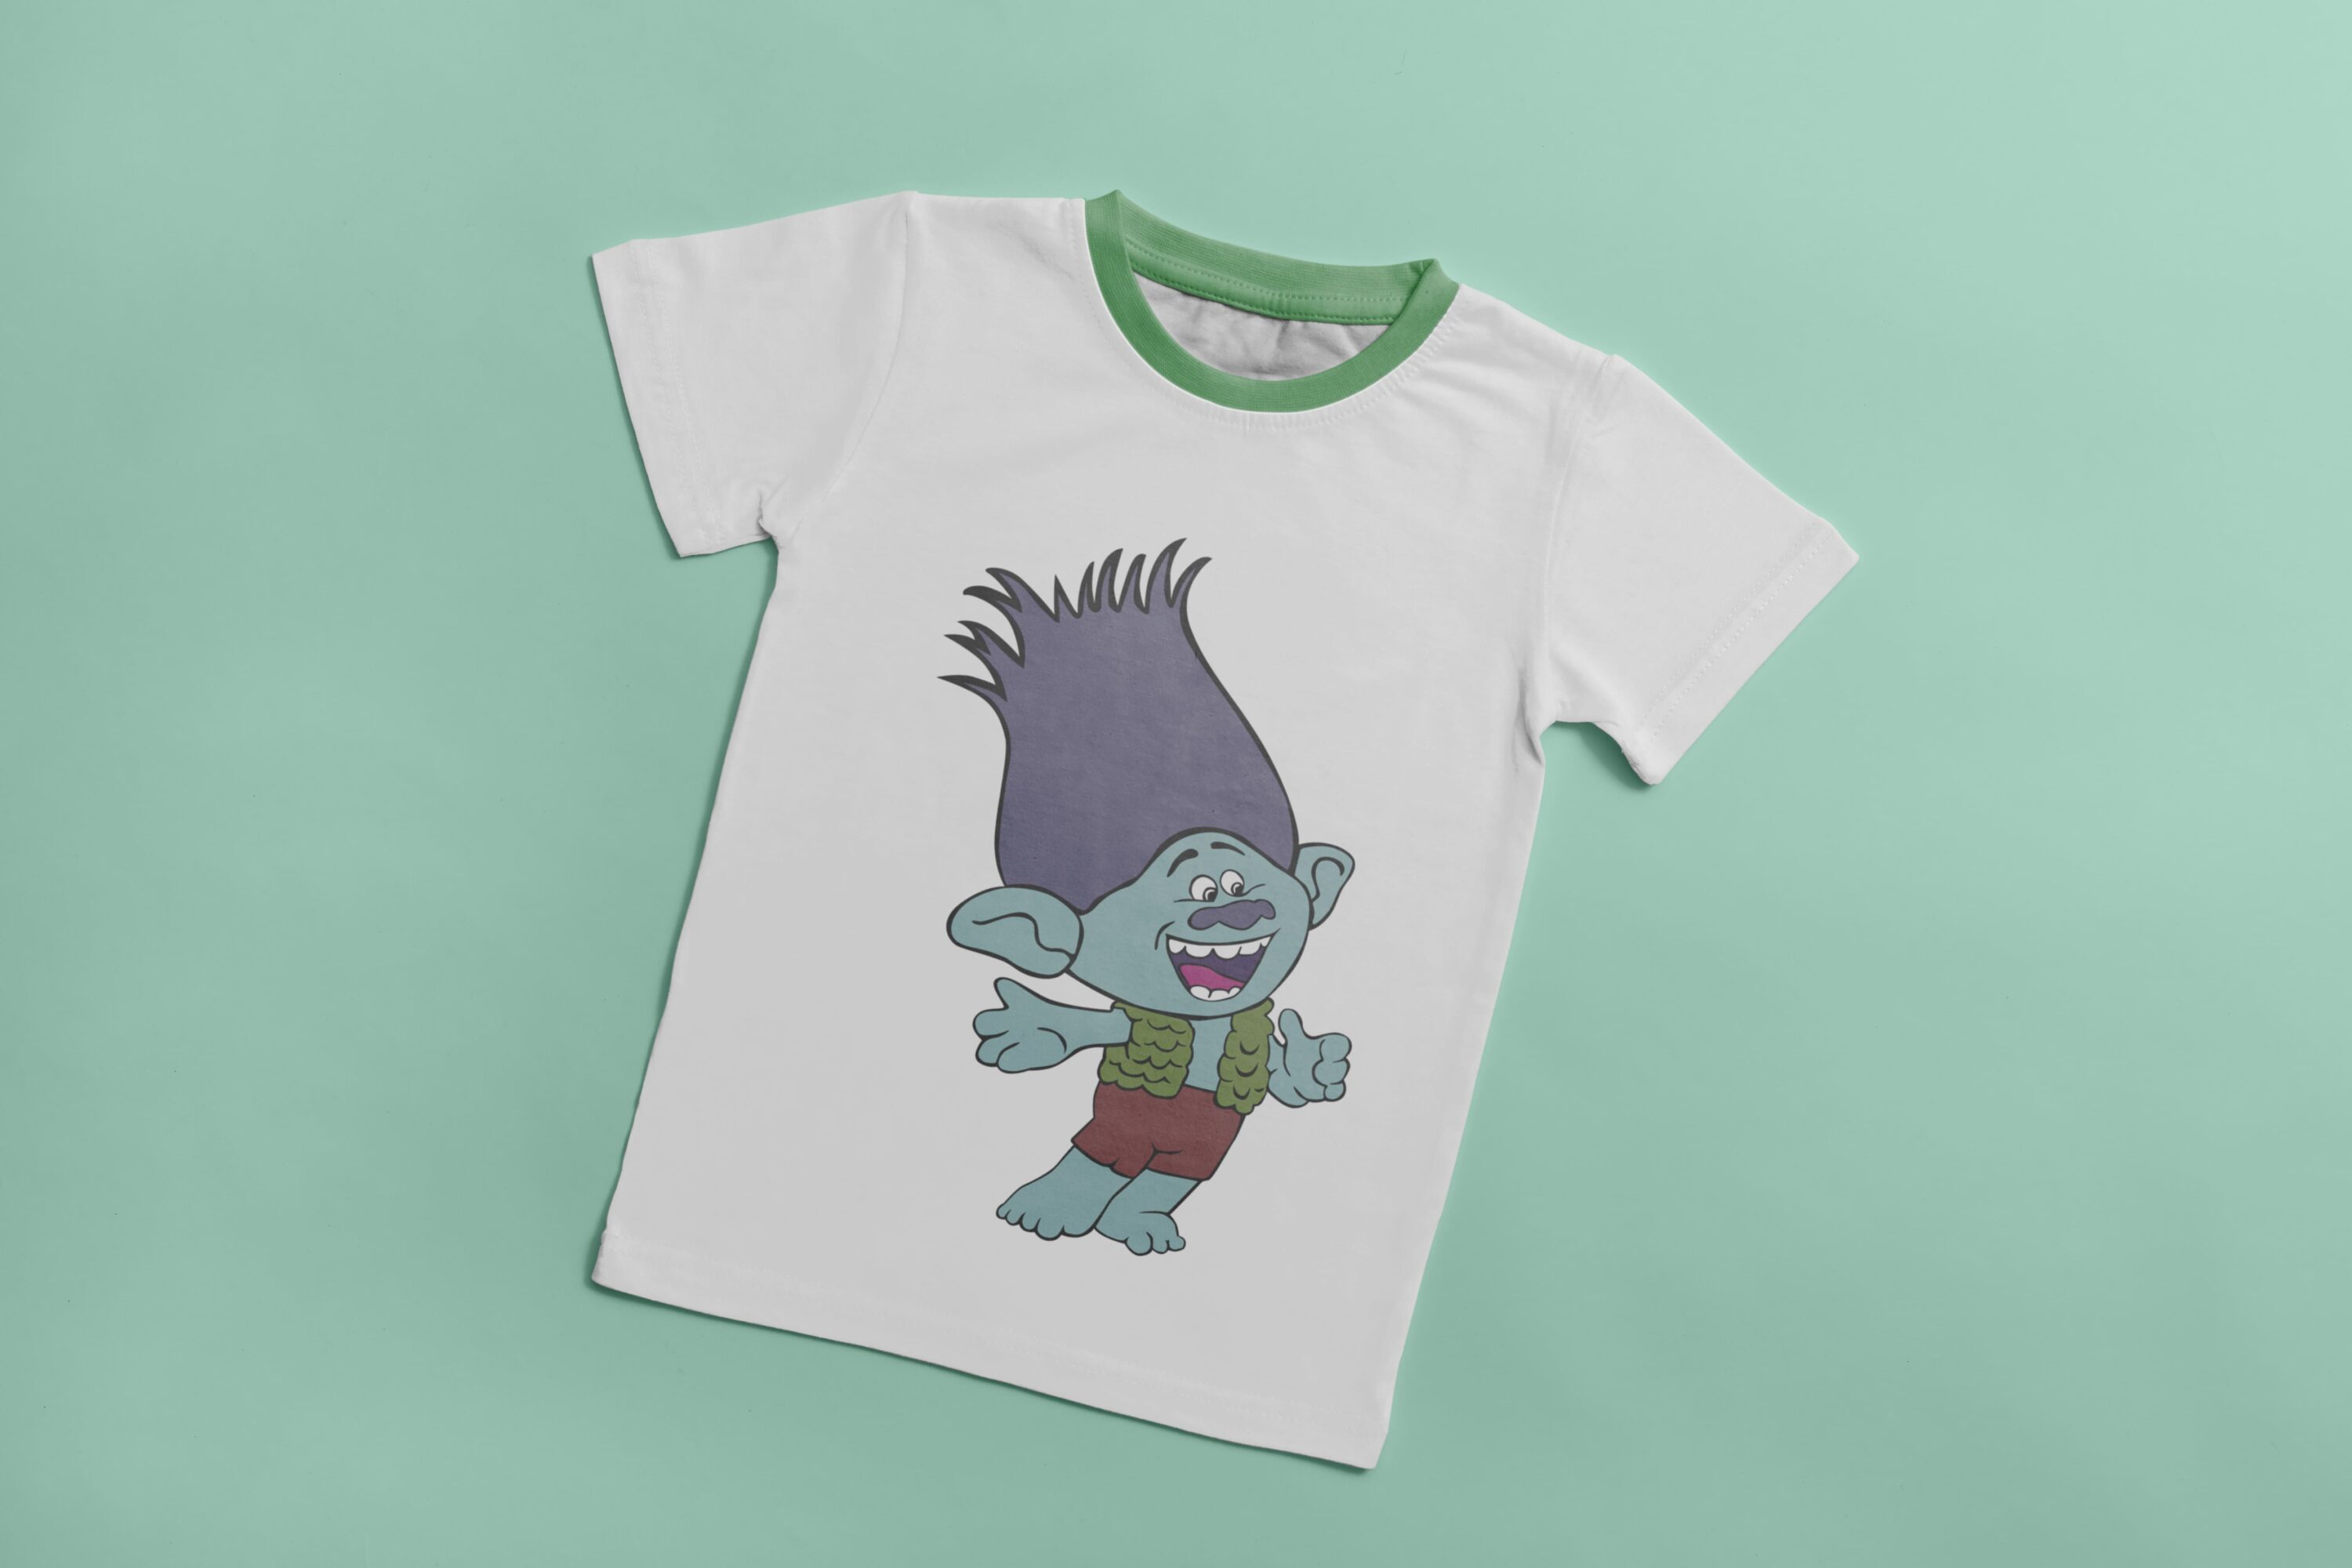 White T-shirt with green collar and image of cartoon character - Branch.